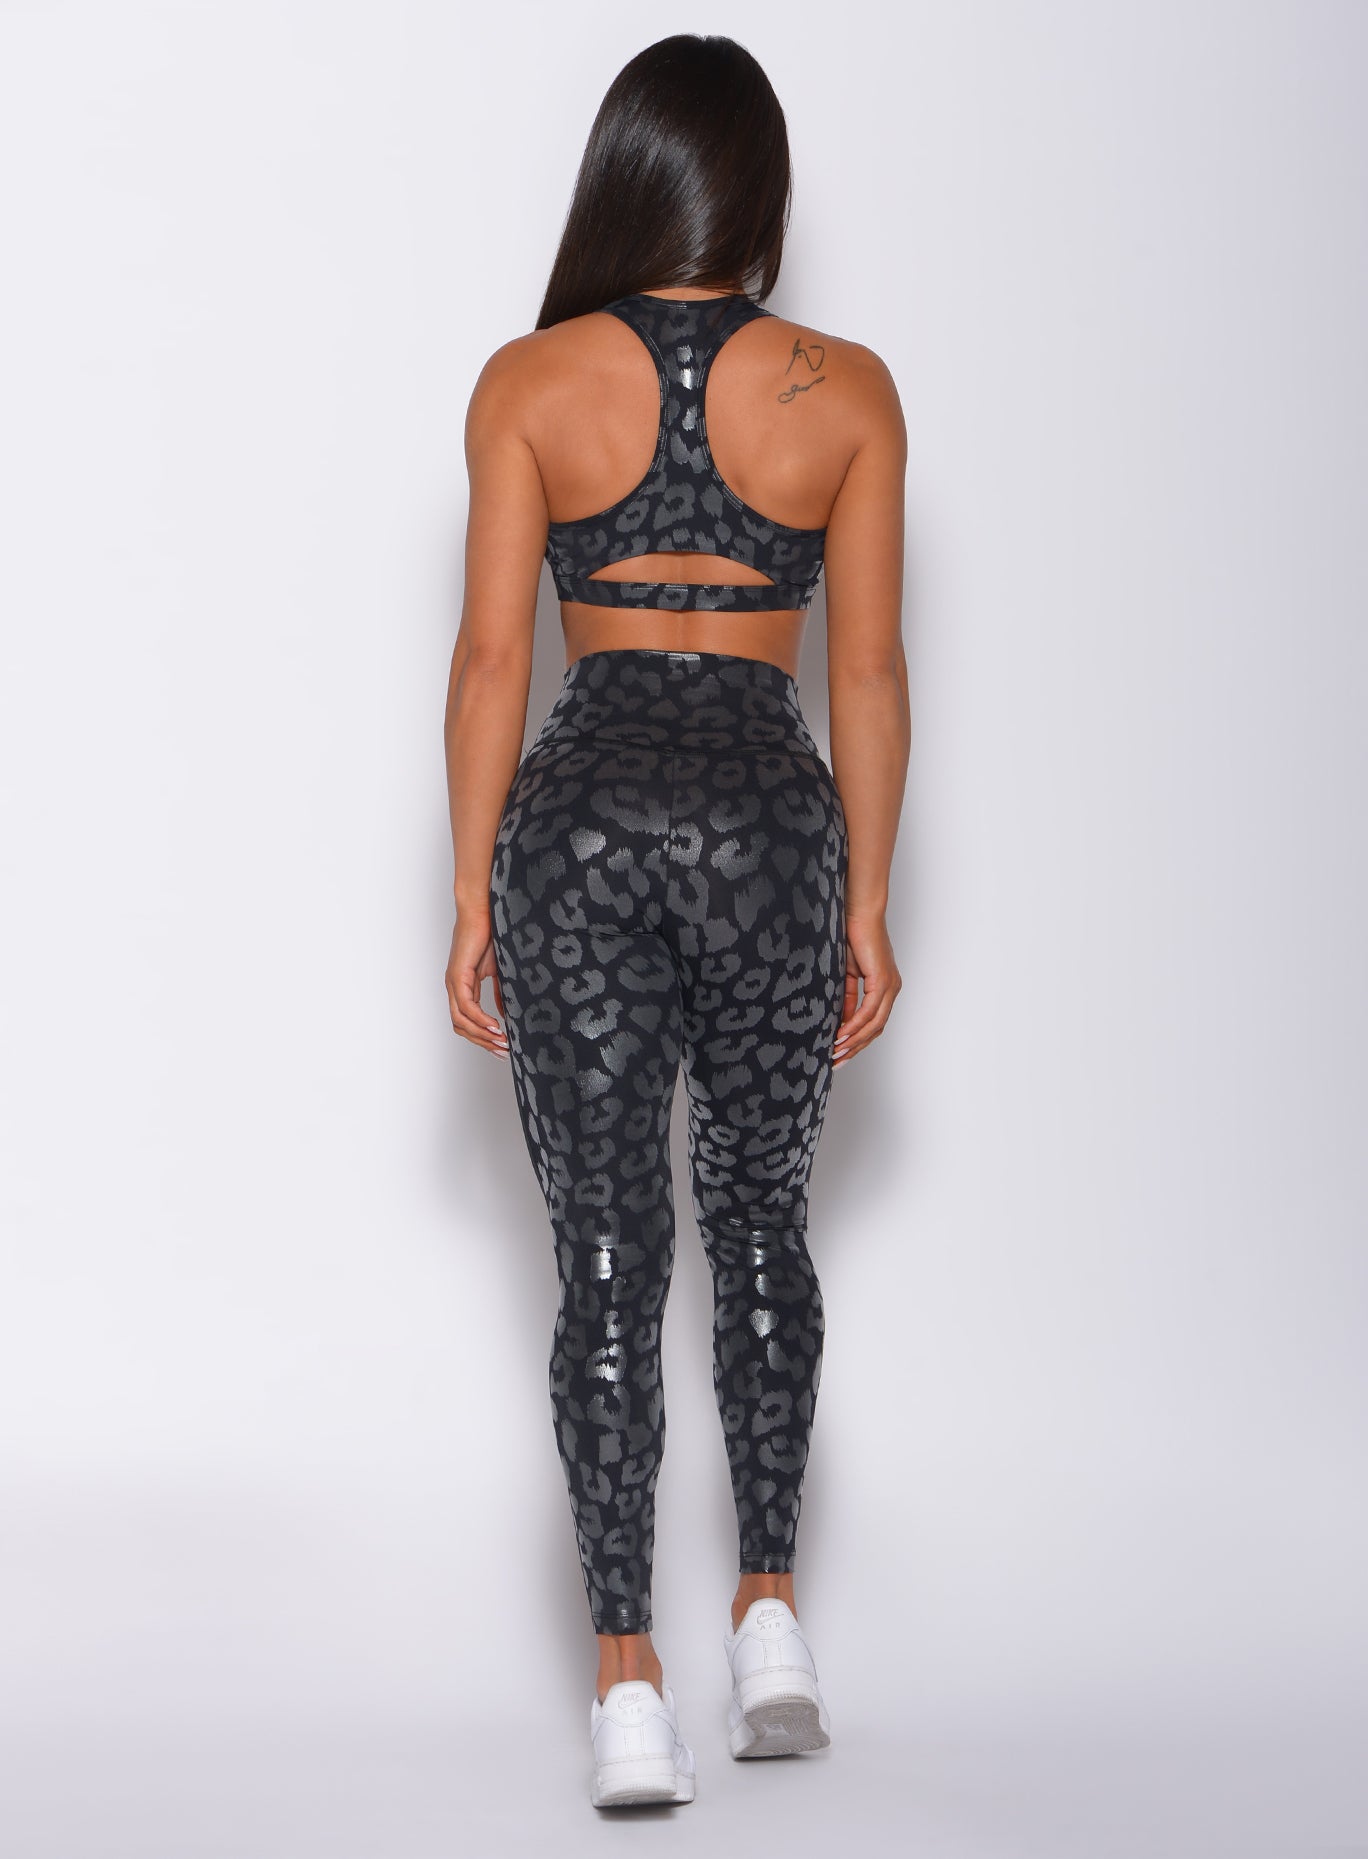 back profile picture of a model wearing our shine leopard leggings in Black Leopard color along with the matching sports bra